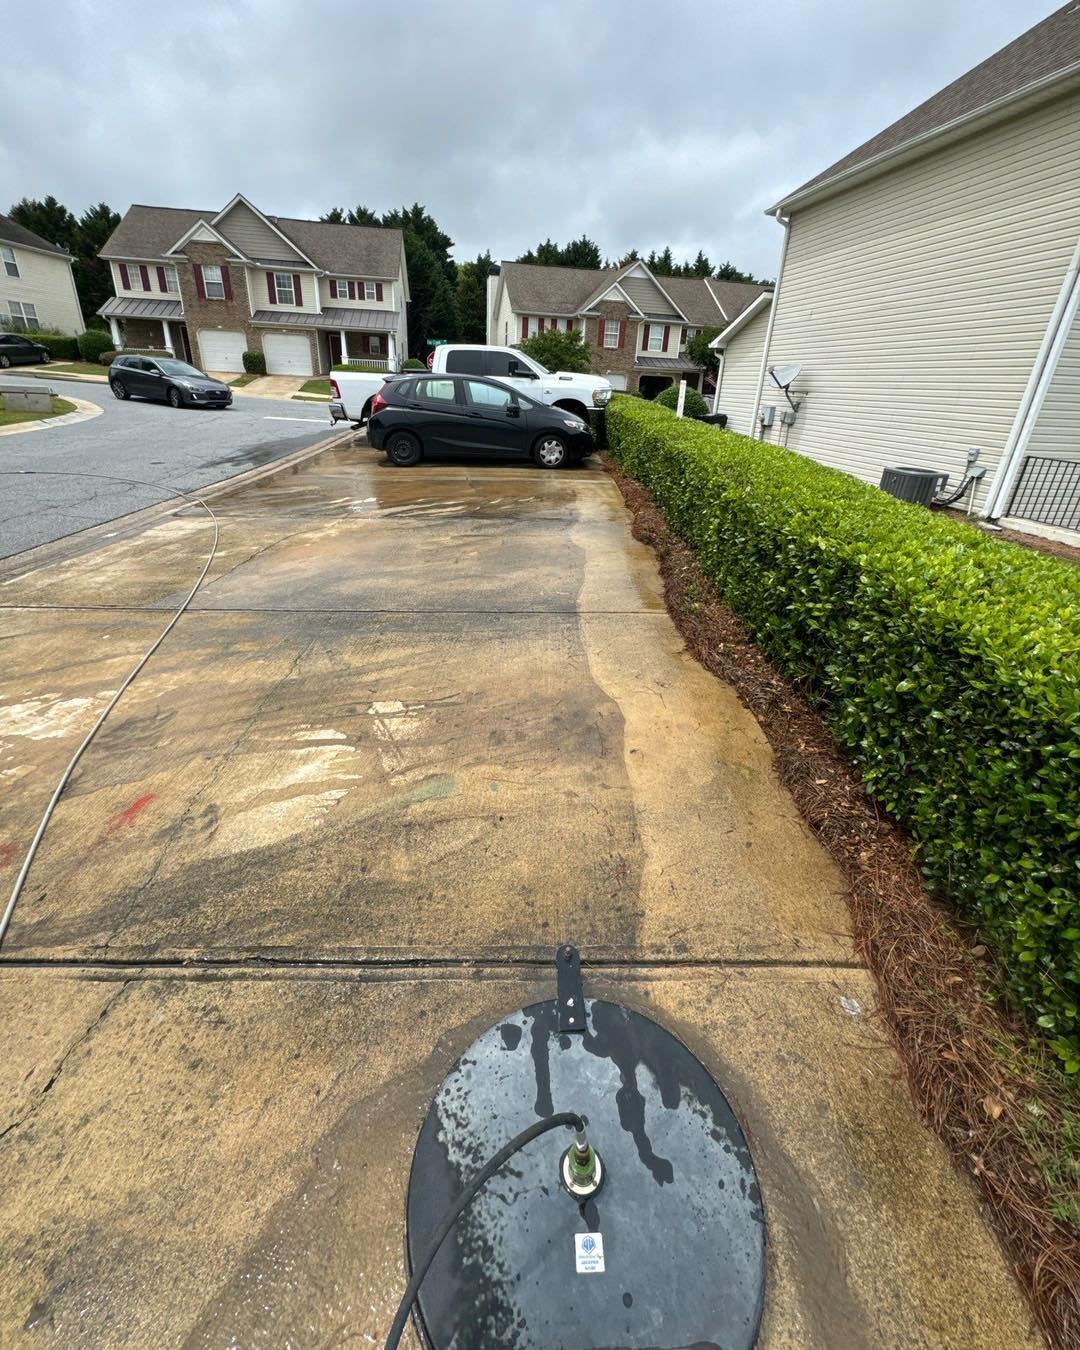 Does your neighborhood have parking pads? Our team can wash away the years of oil and dirt and give your community a fresh look! 🧼

📱678-269-7917
✉️ info@gapressurewashing.com 

#cherokeecountyrealestate #cherokeecountyrealtor #garealestate #gareal